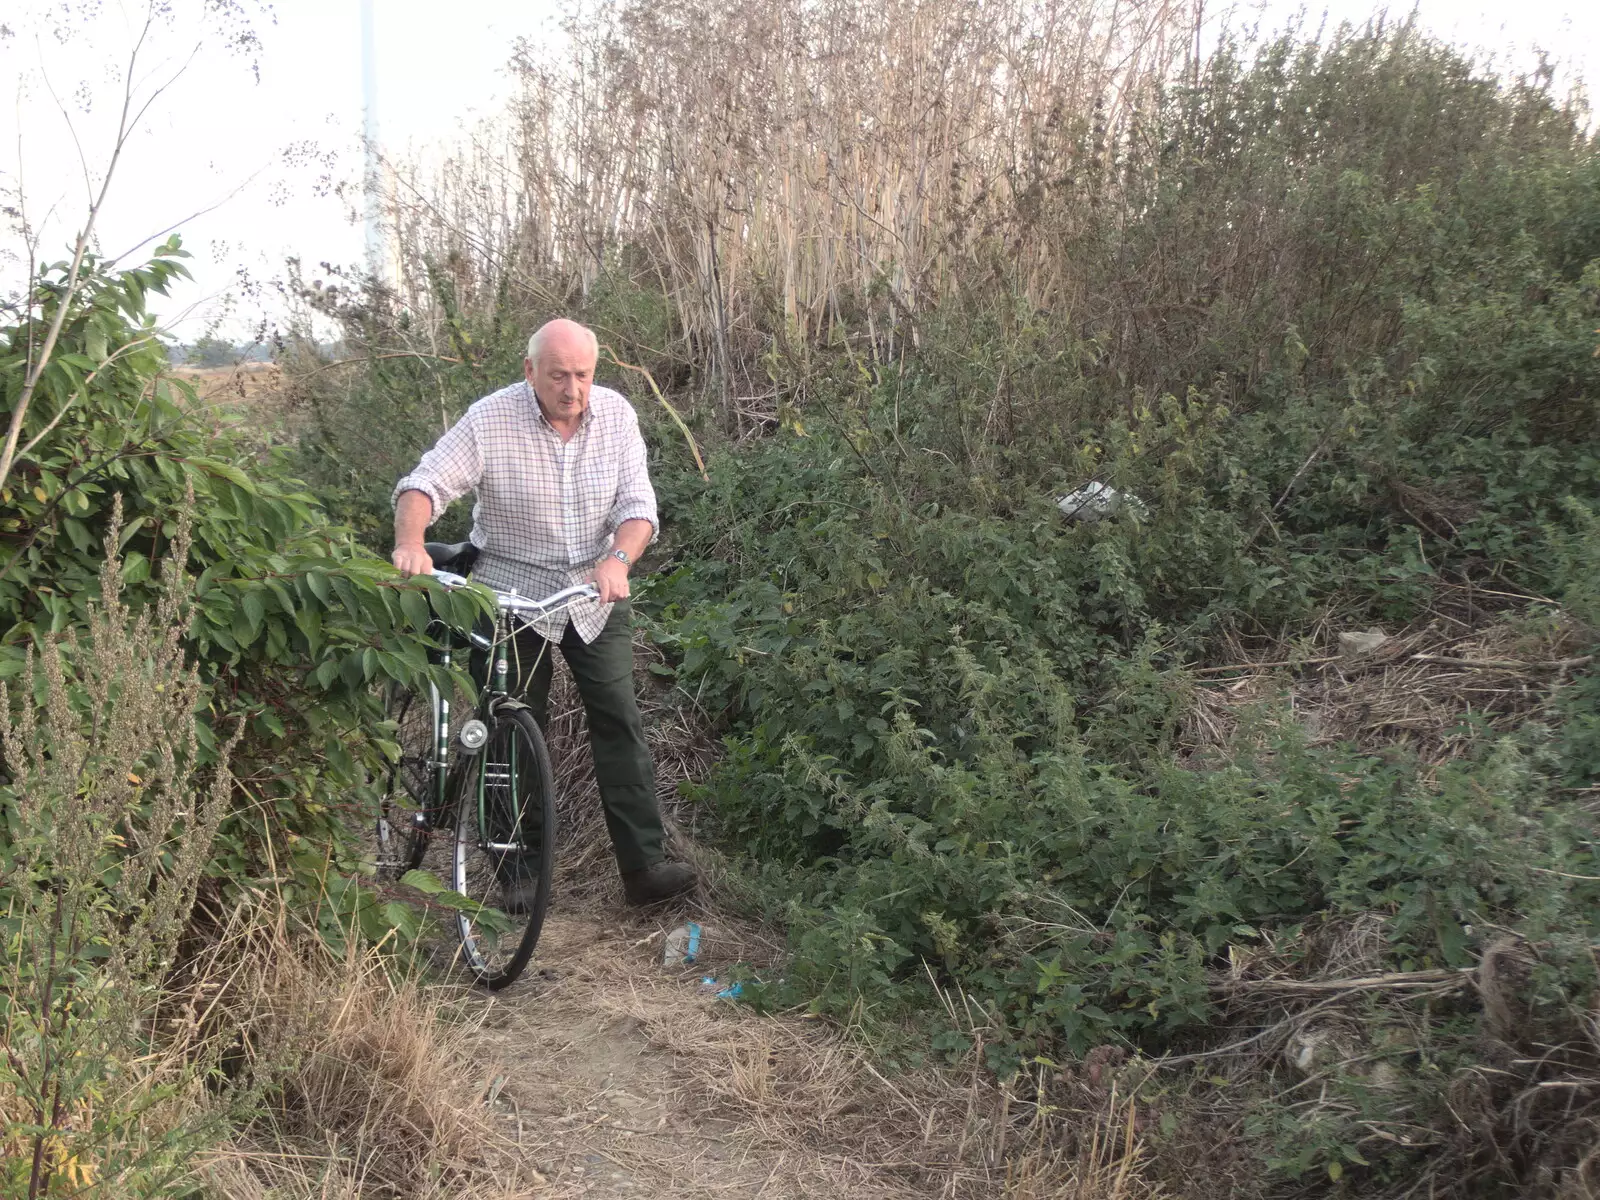 Mick hauls his bike through the undergrowth, from The Last Weavers Ever, Market Hill, Diss, Norfolk - 10th September 2021